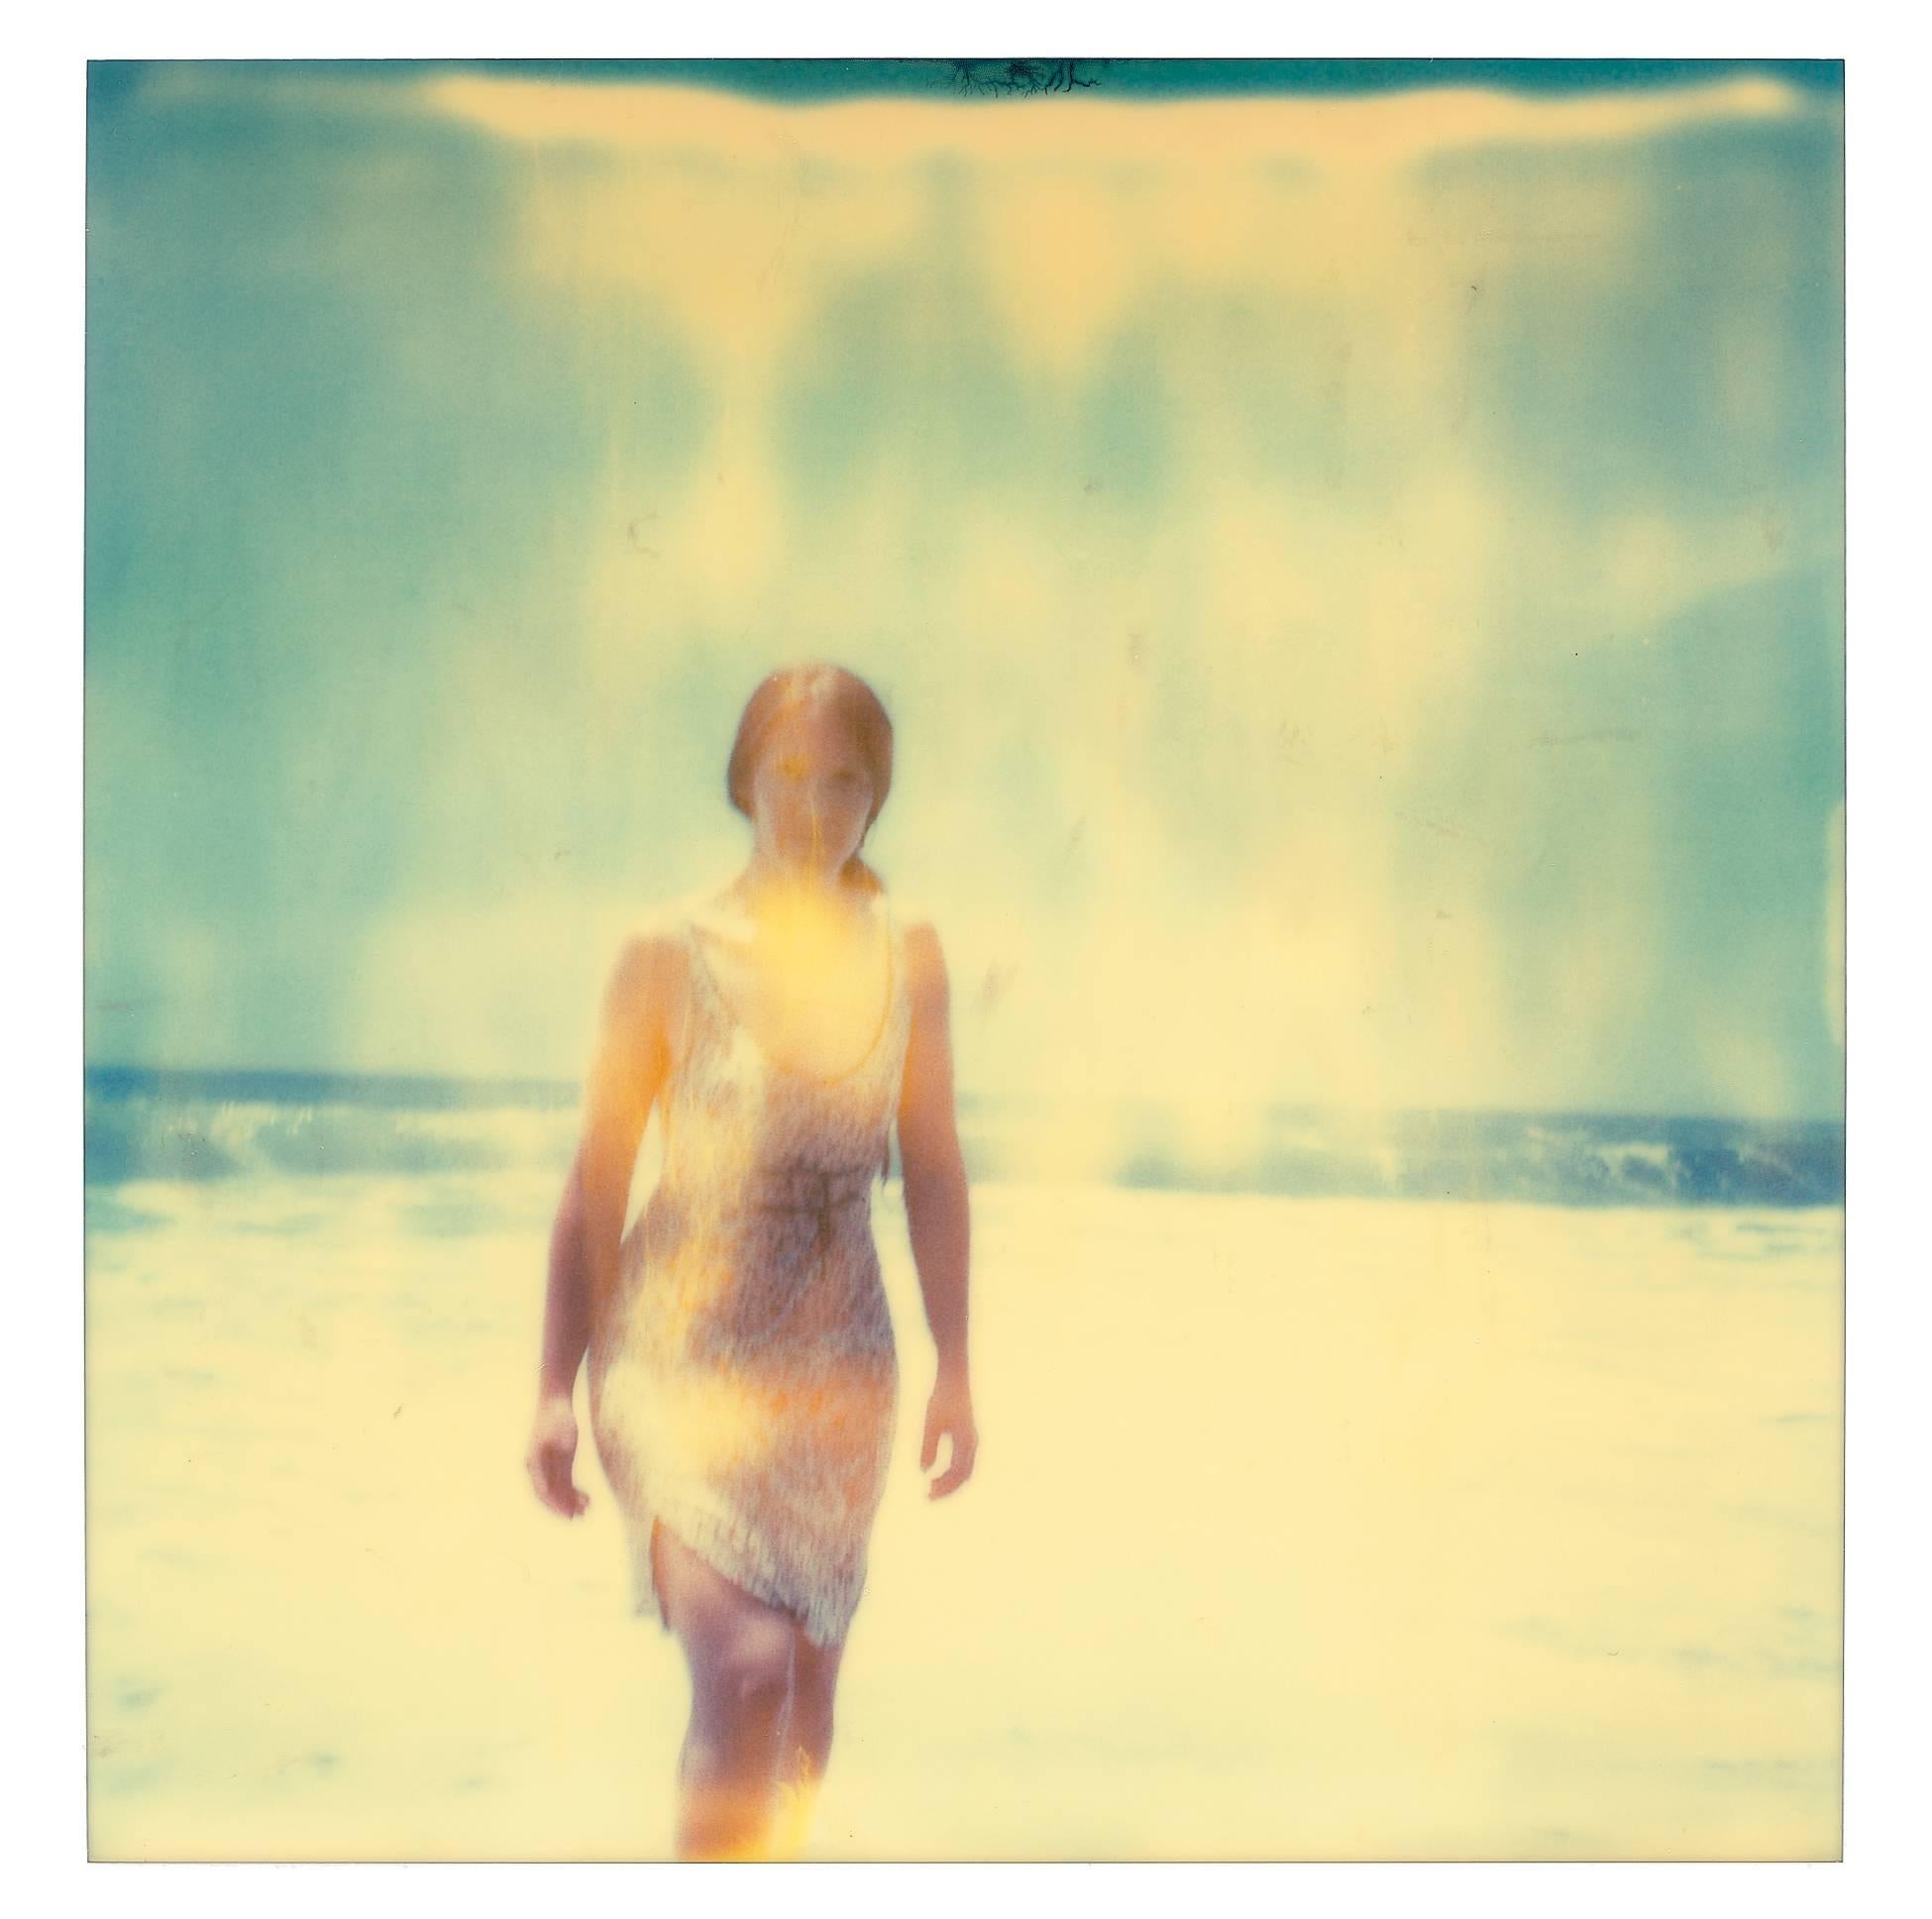 Woman in Malibu II (Stranger than Paradise), 1999, 20x20cm, sold out Edition of 10, 
Artist Proof 2/2. Digital C-Print, based on an expired Polaroid. 
Certificate and Signature label, artist Inventory No. 315_2.31. 
Not mounted

LIFE’S A DREAM
(The